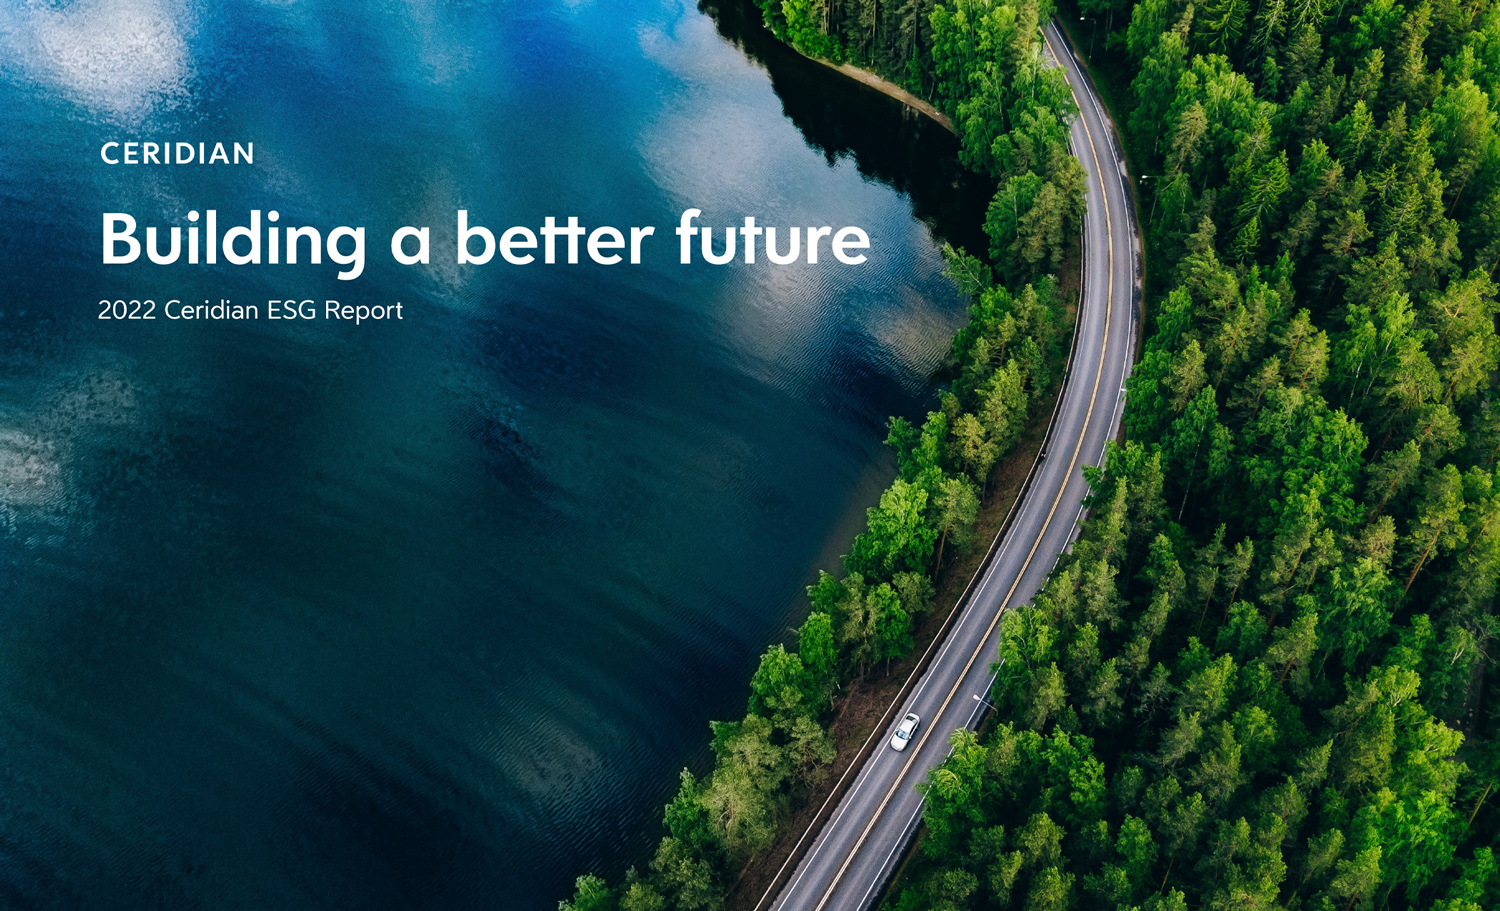 "Ceridian Building a better future 2022 Ceridian ESG Report" over a winding road through a forest